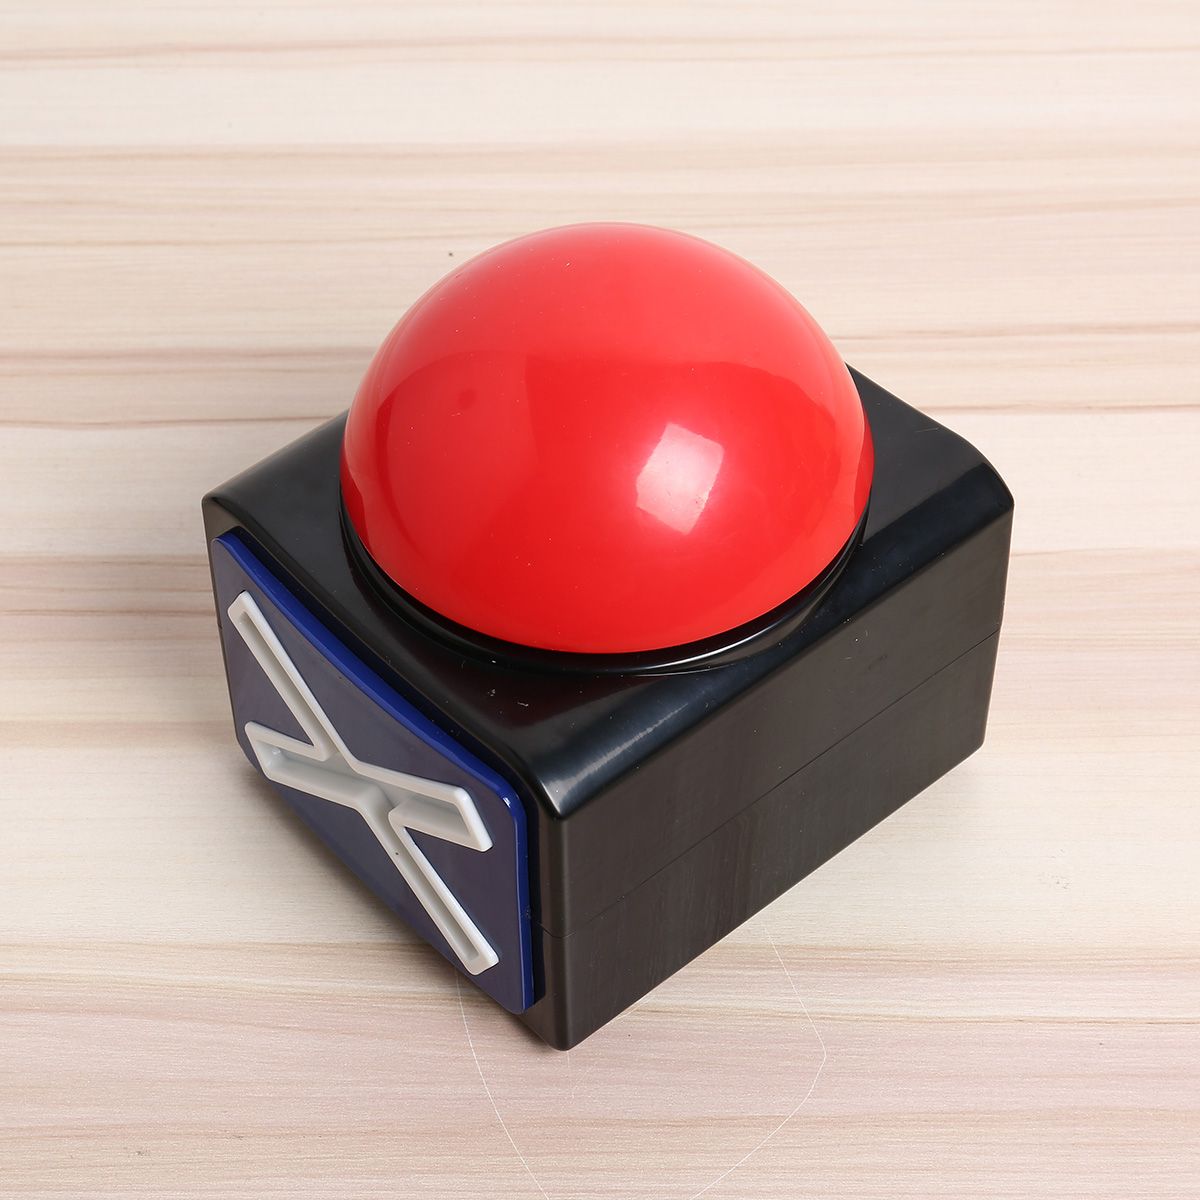 Bang-good-Buzzer-Alarm-Push-Button-Lottery-Trivia-Quiz-Game-Red-Light-With-Sound-And-Light-1318897